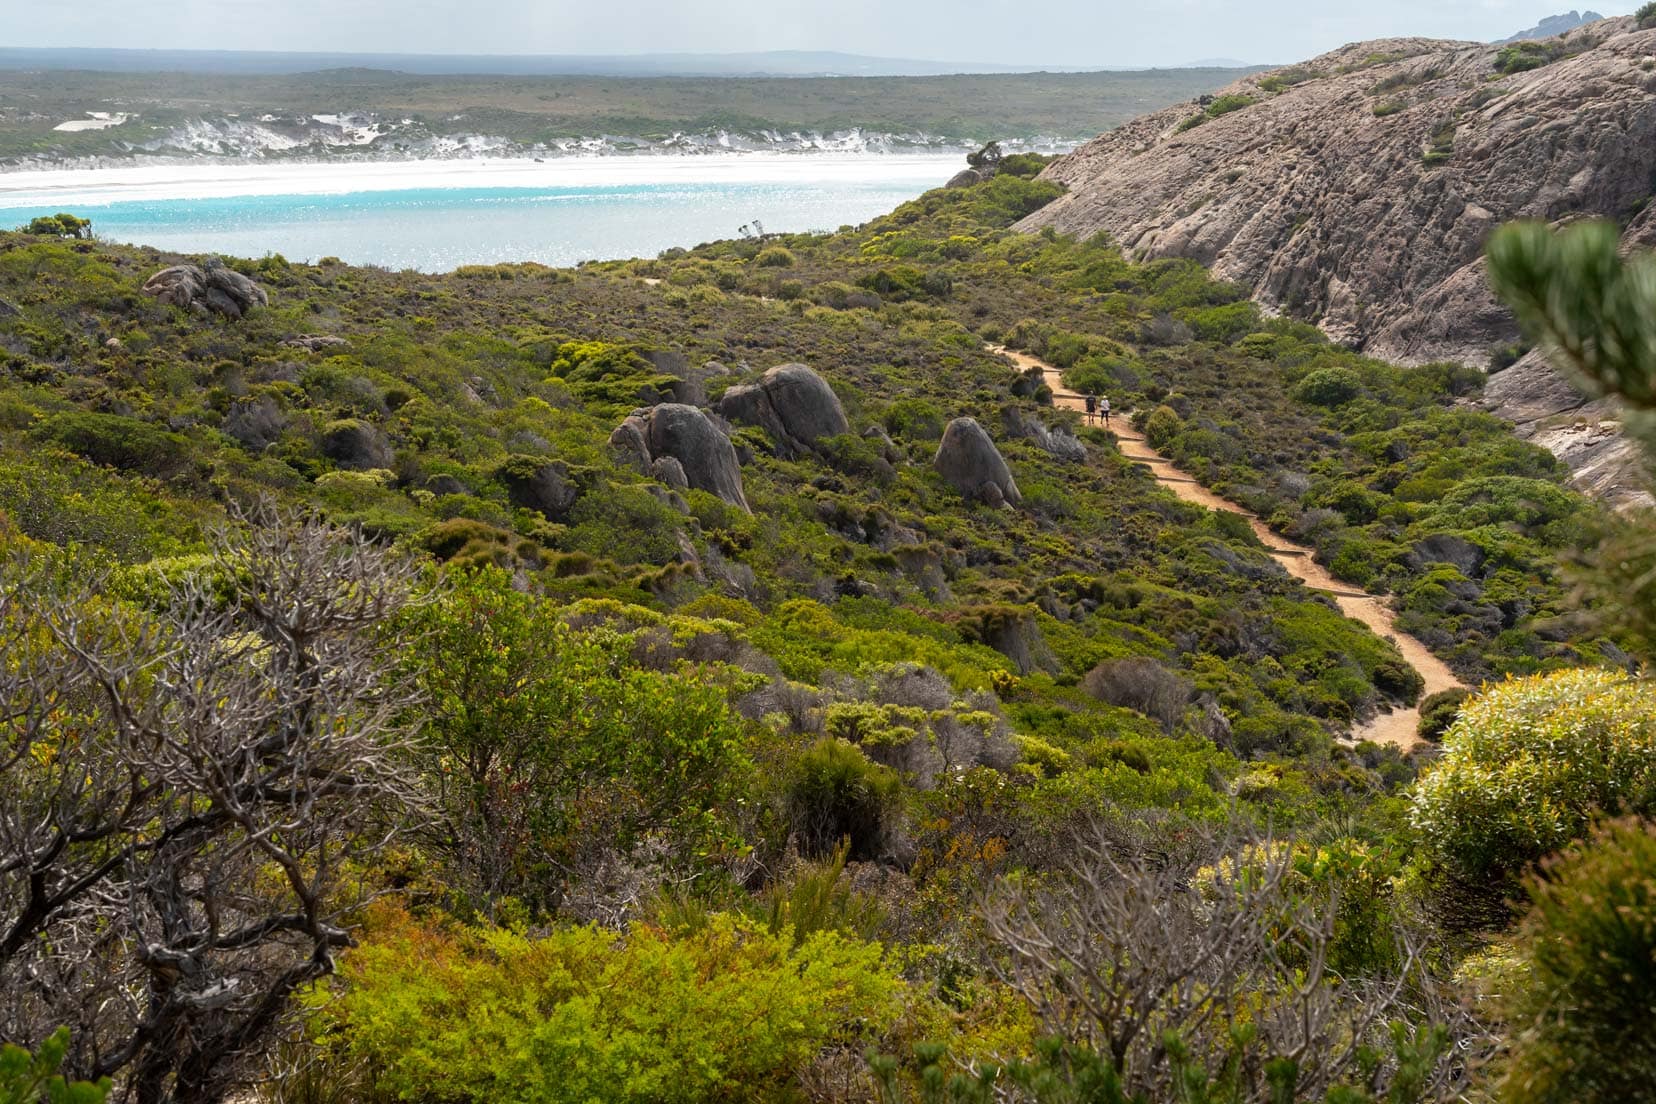 View of Lucky Bay in the distance with a path through low green bushes